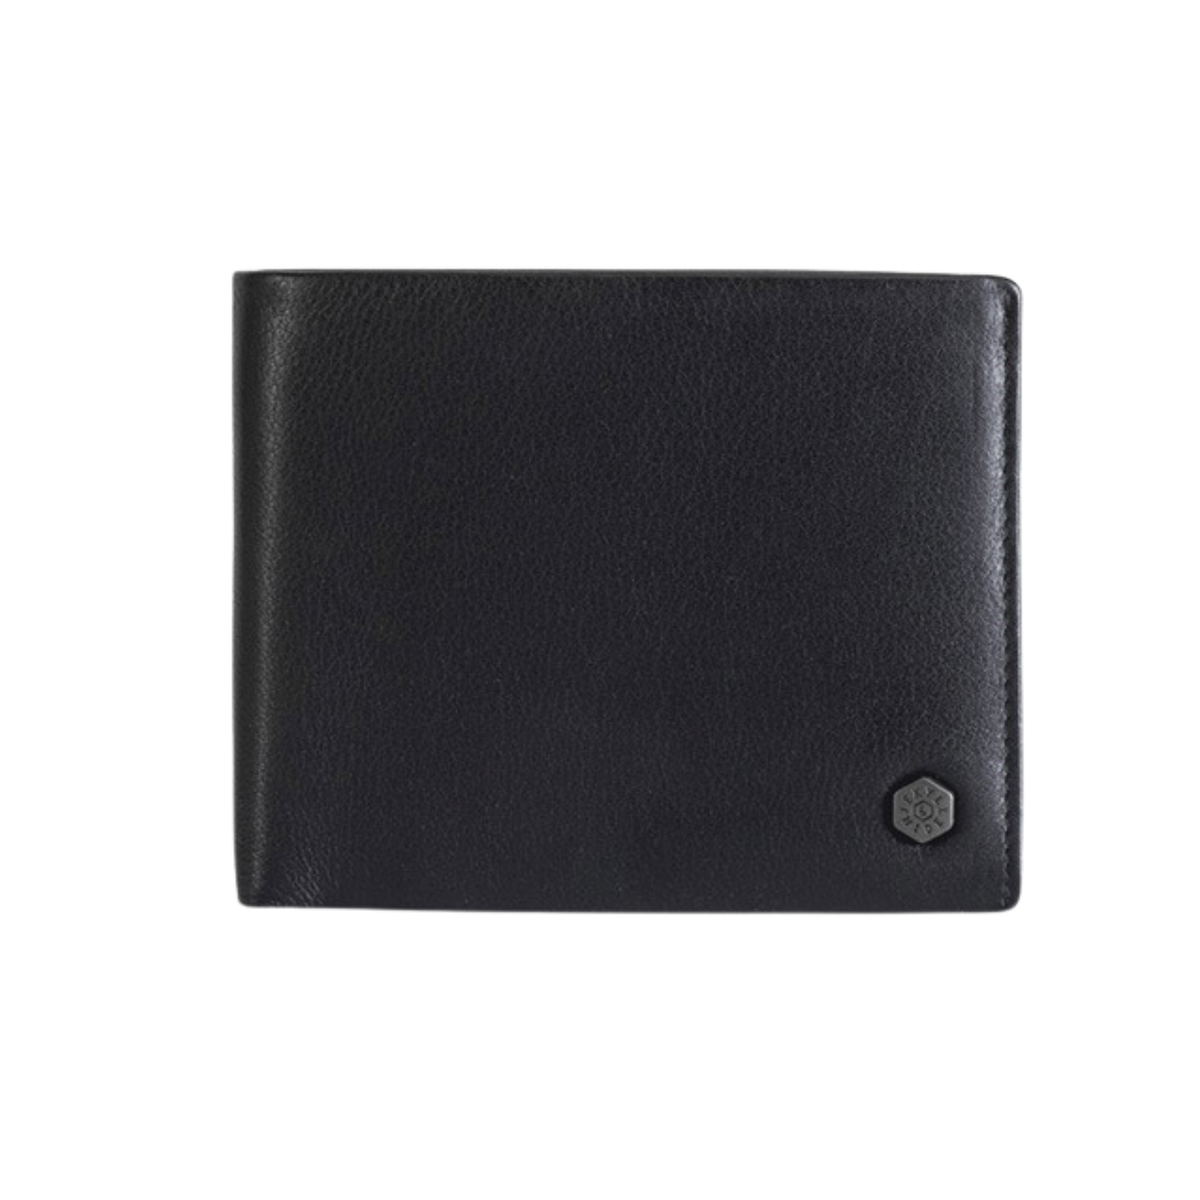 JEKYLL & HIDE LARGE SOFT LEATHER BILLFOLD WALLET WITH COIN - TEXAS BLACK